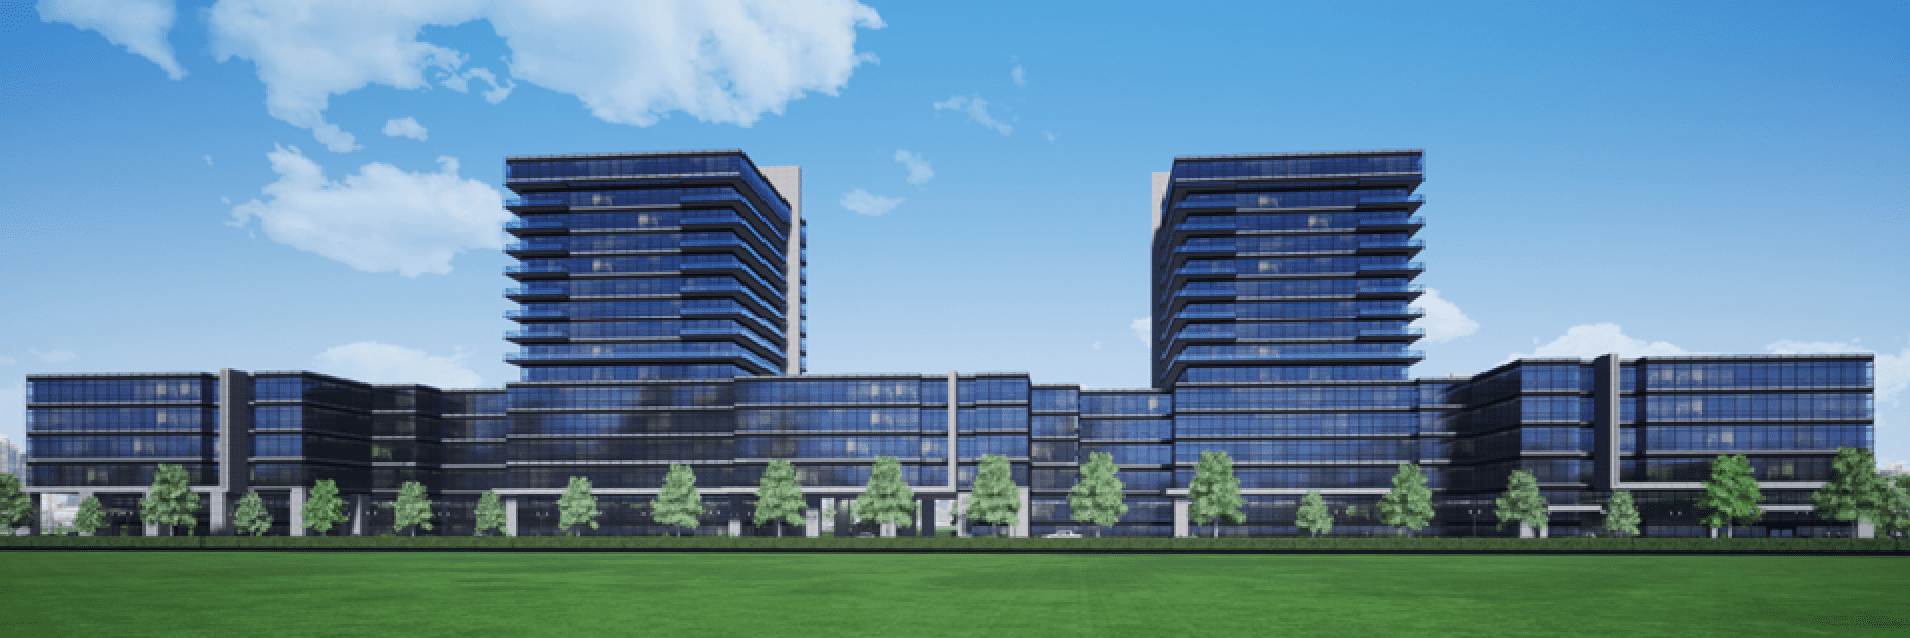 Recent Financing: Proposed 736,897 SF GFA, Mixed-Use Multi-Residential Condo, Richmond Hill, ON